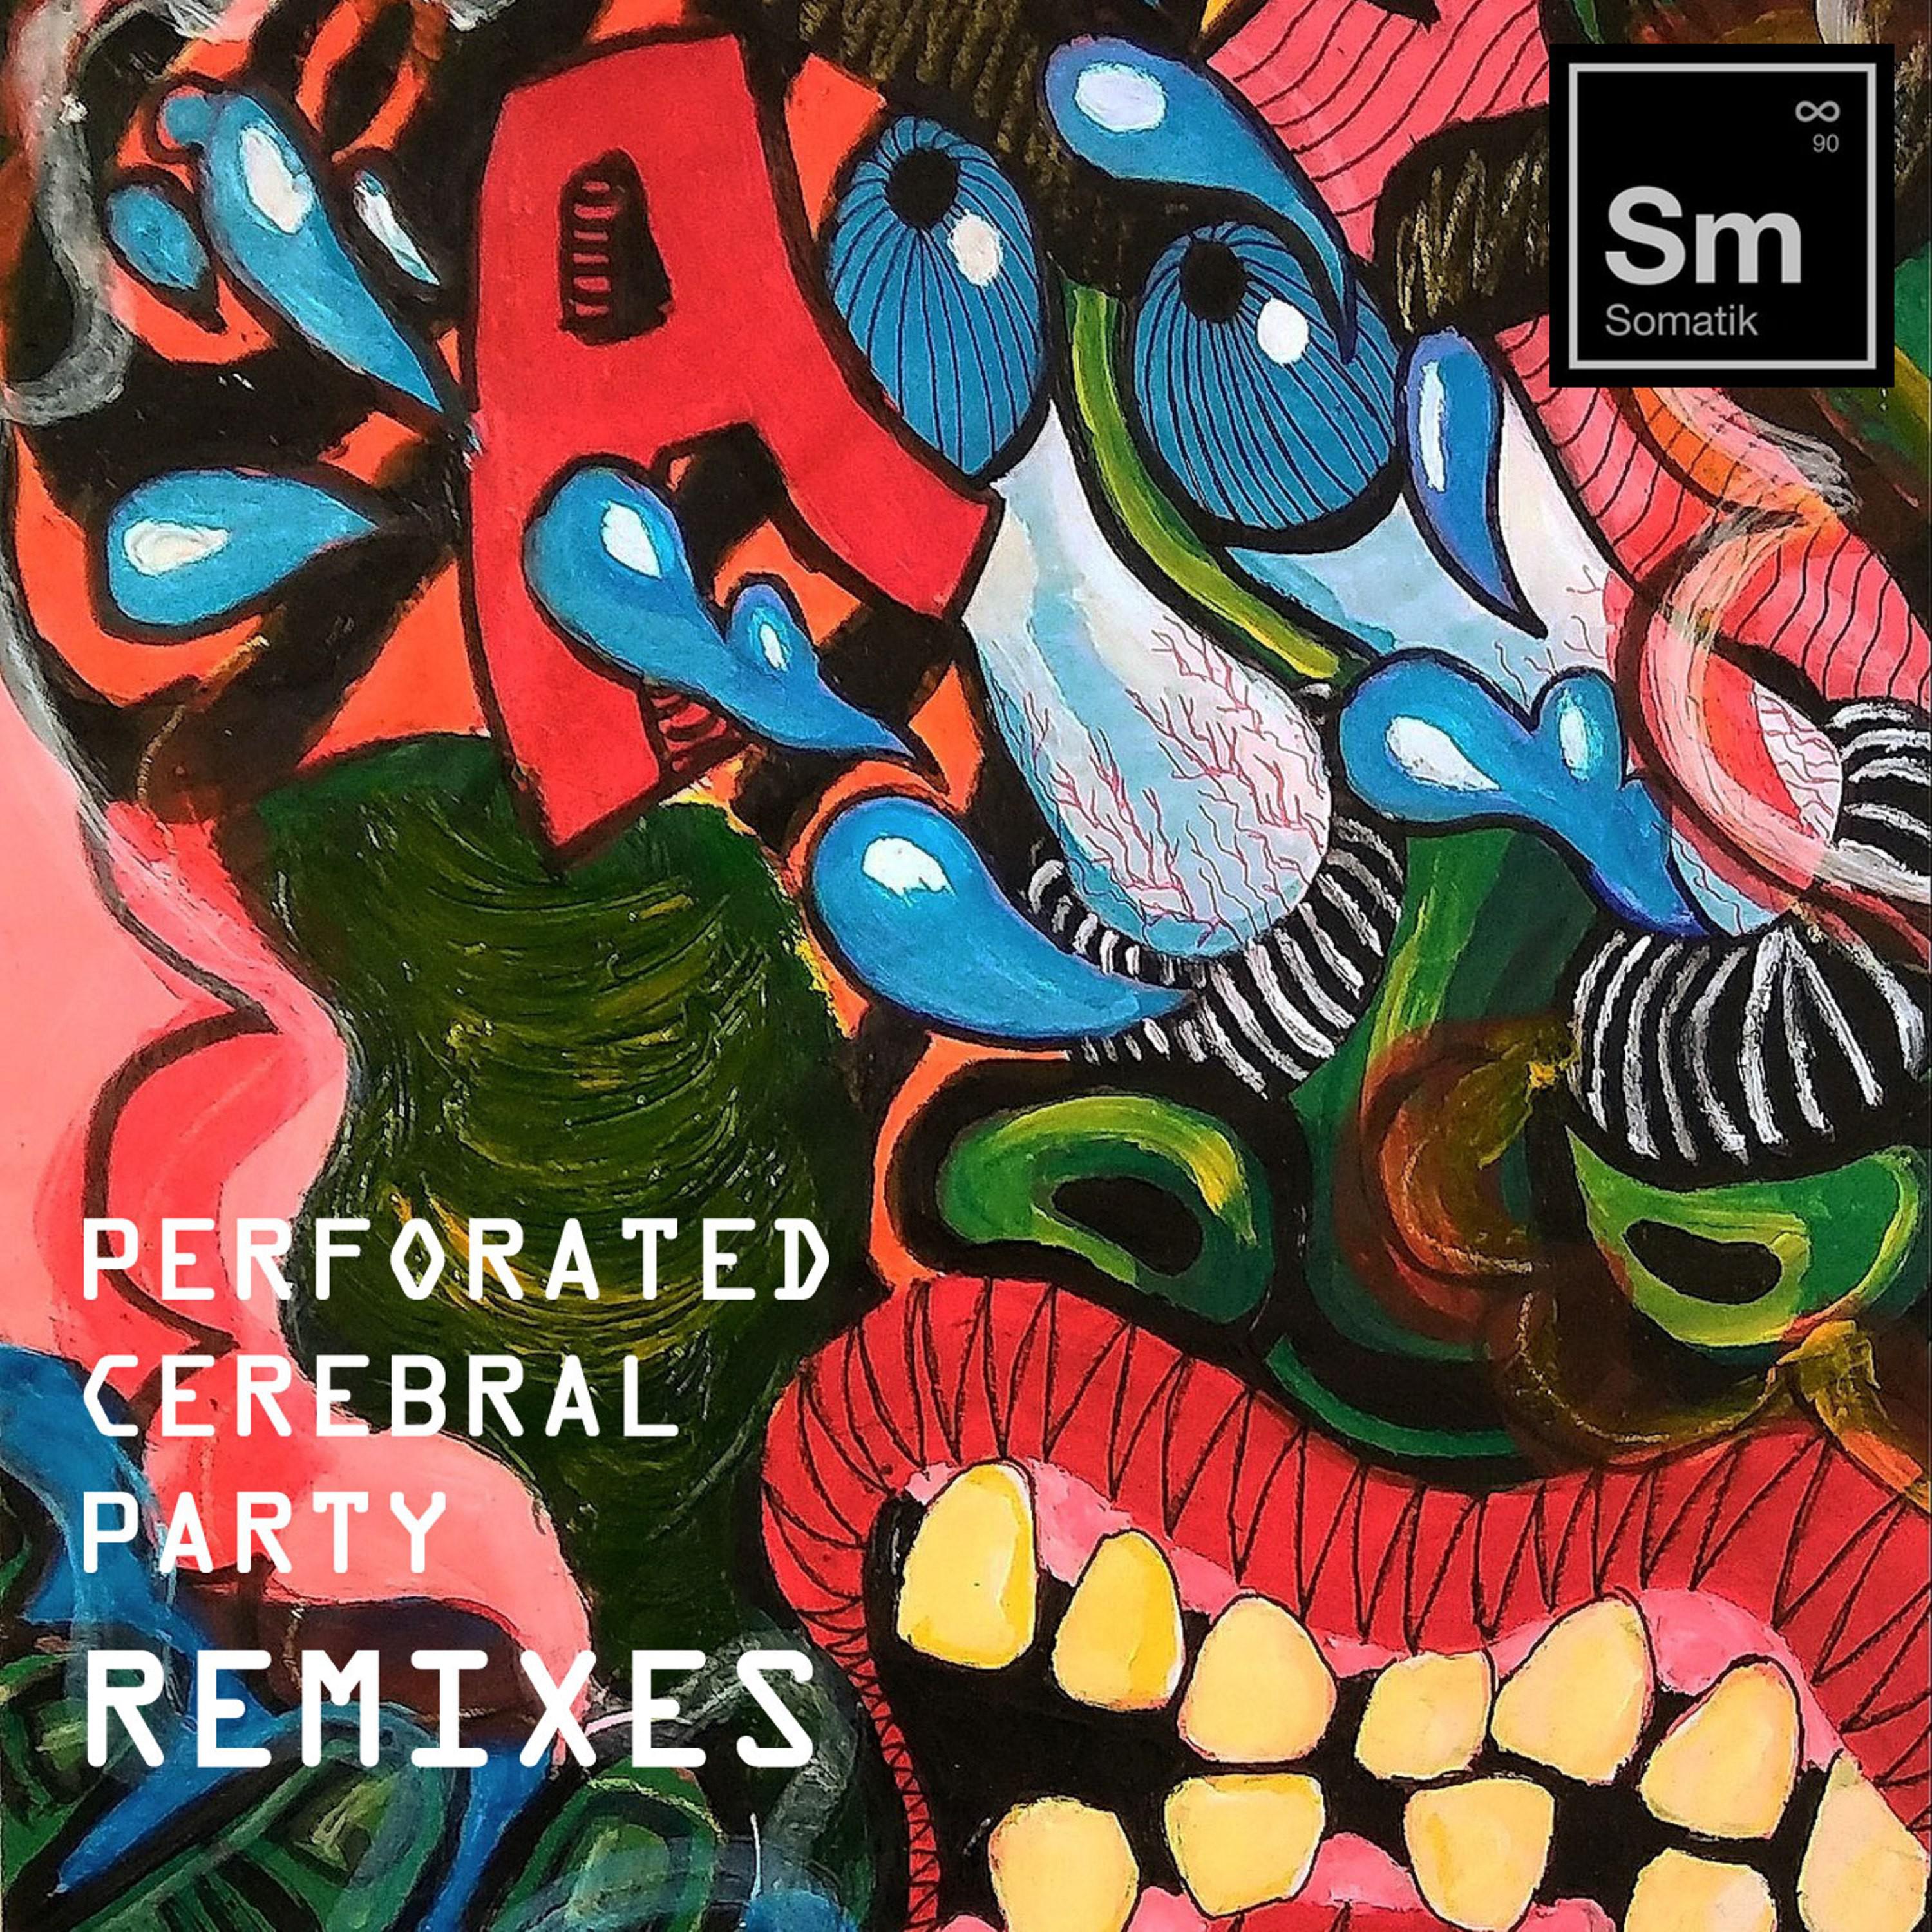 Voina (Perforated Cerebral Party Remix)